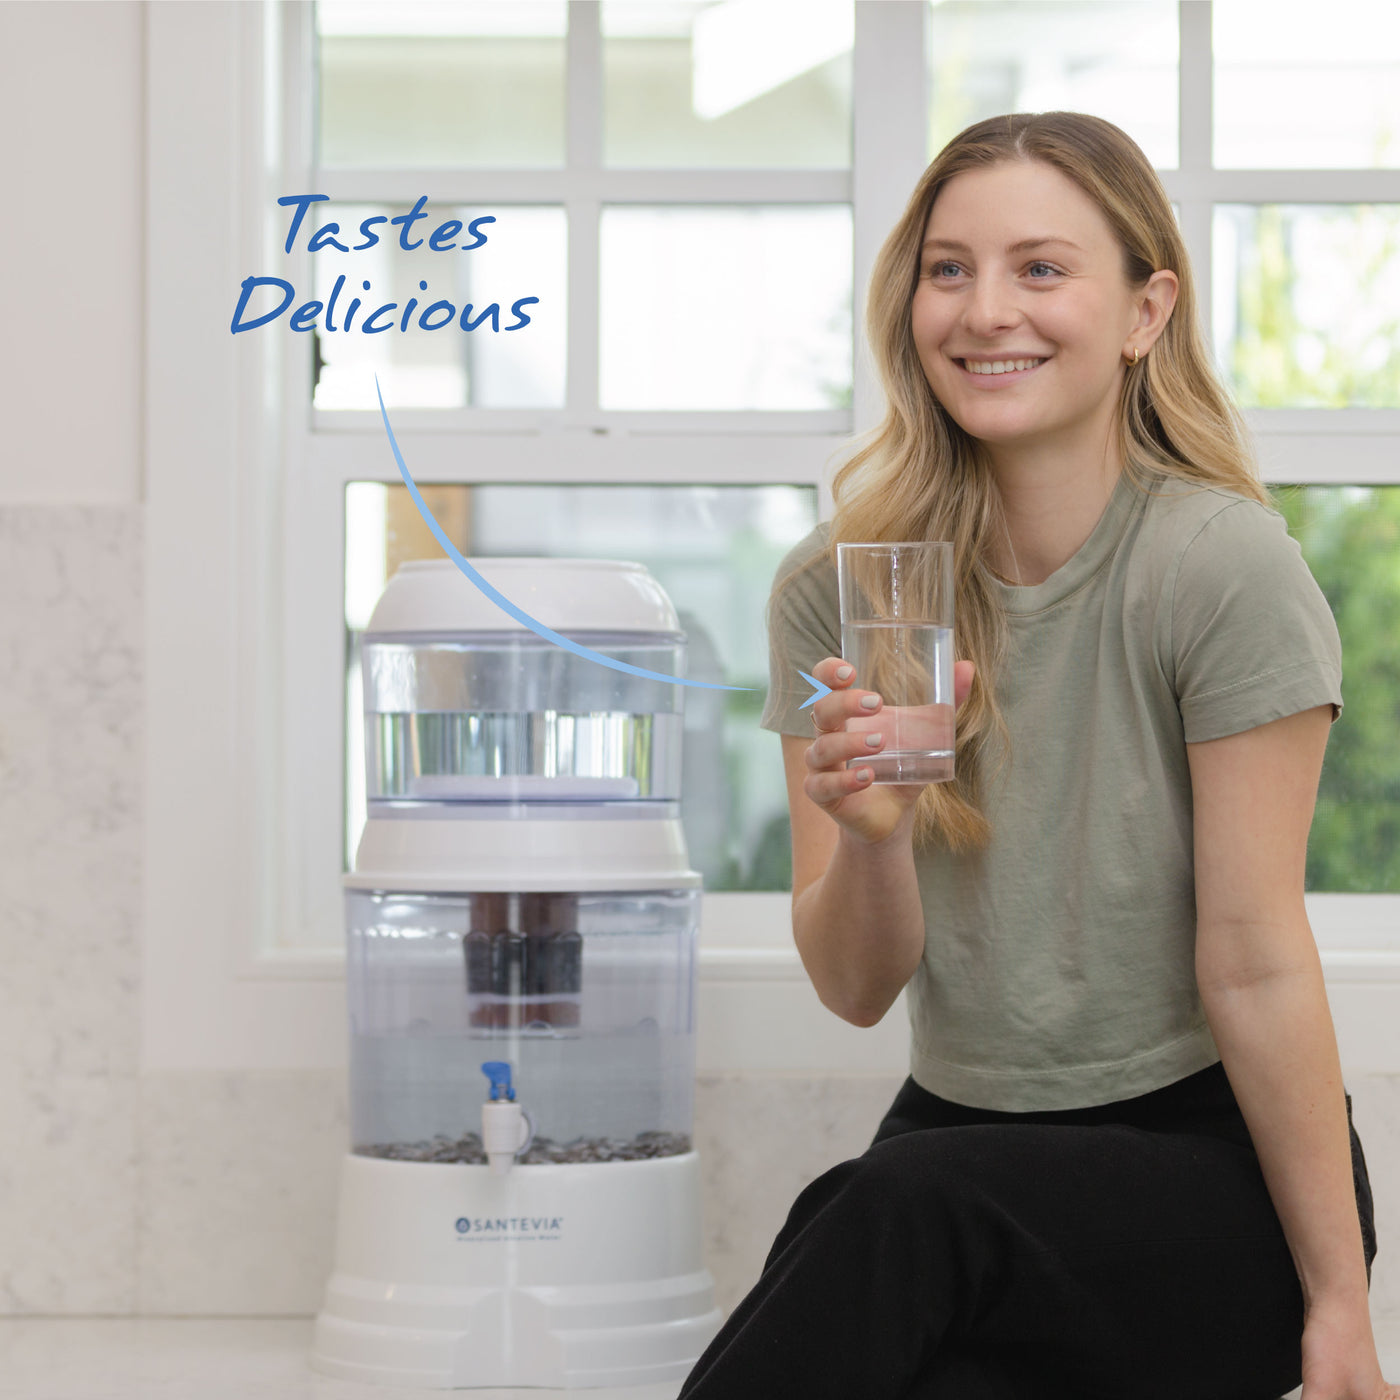 The Santevia Gravity Water System Makes Water That Tastes Delicious#model_countertop